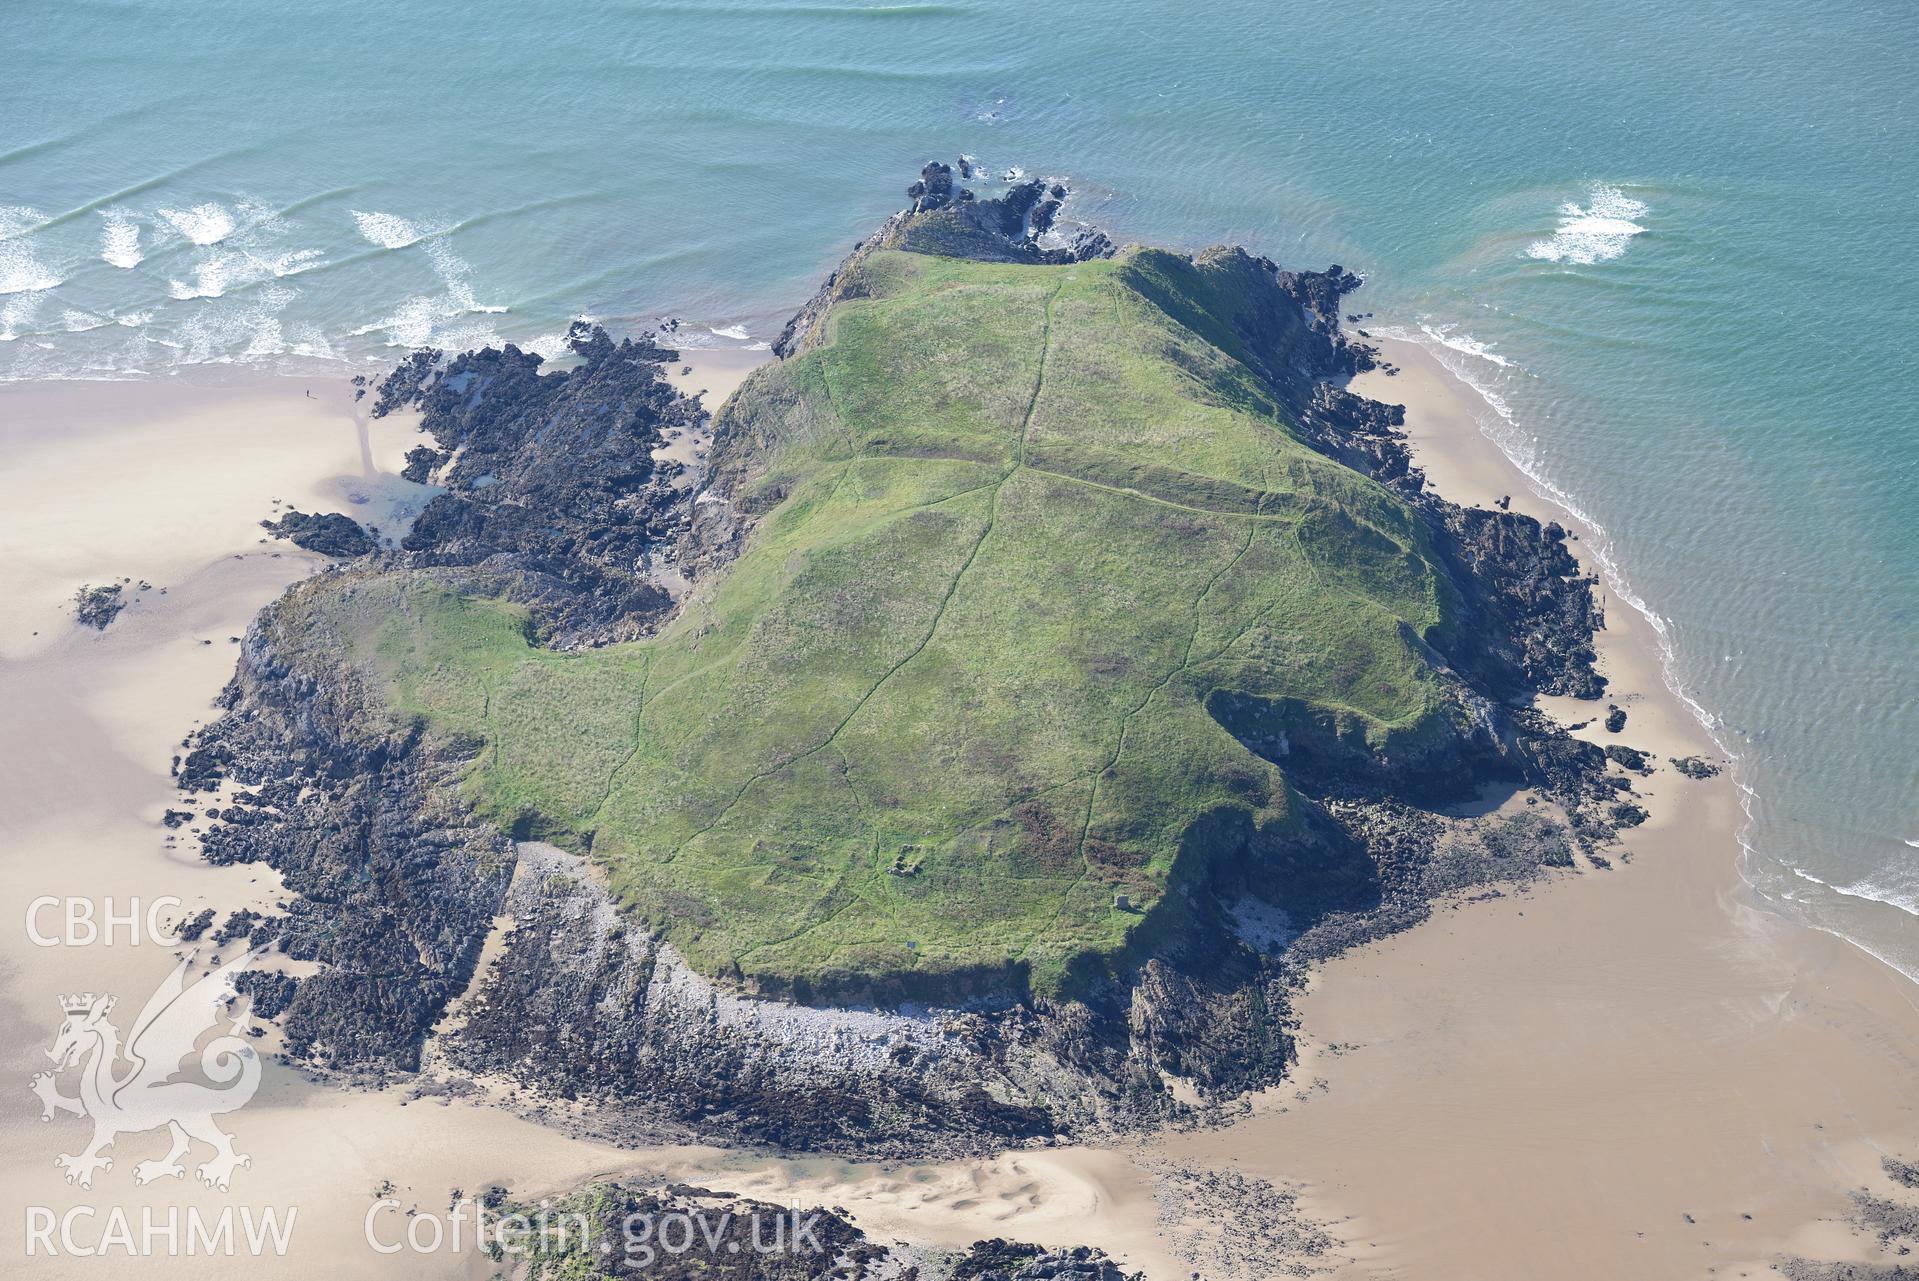 Burry Holms, with its promontory fort and medieval hermitage site, on the western coast of the Gower Peninsula. Oblique aerial photograph taken during the Royal Commission's programme of archaeological aerial reconnaissance by Toby Driver on 30th September 2015.